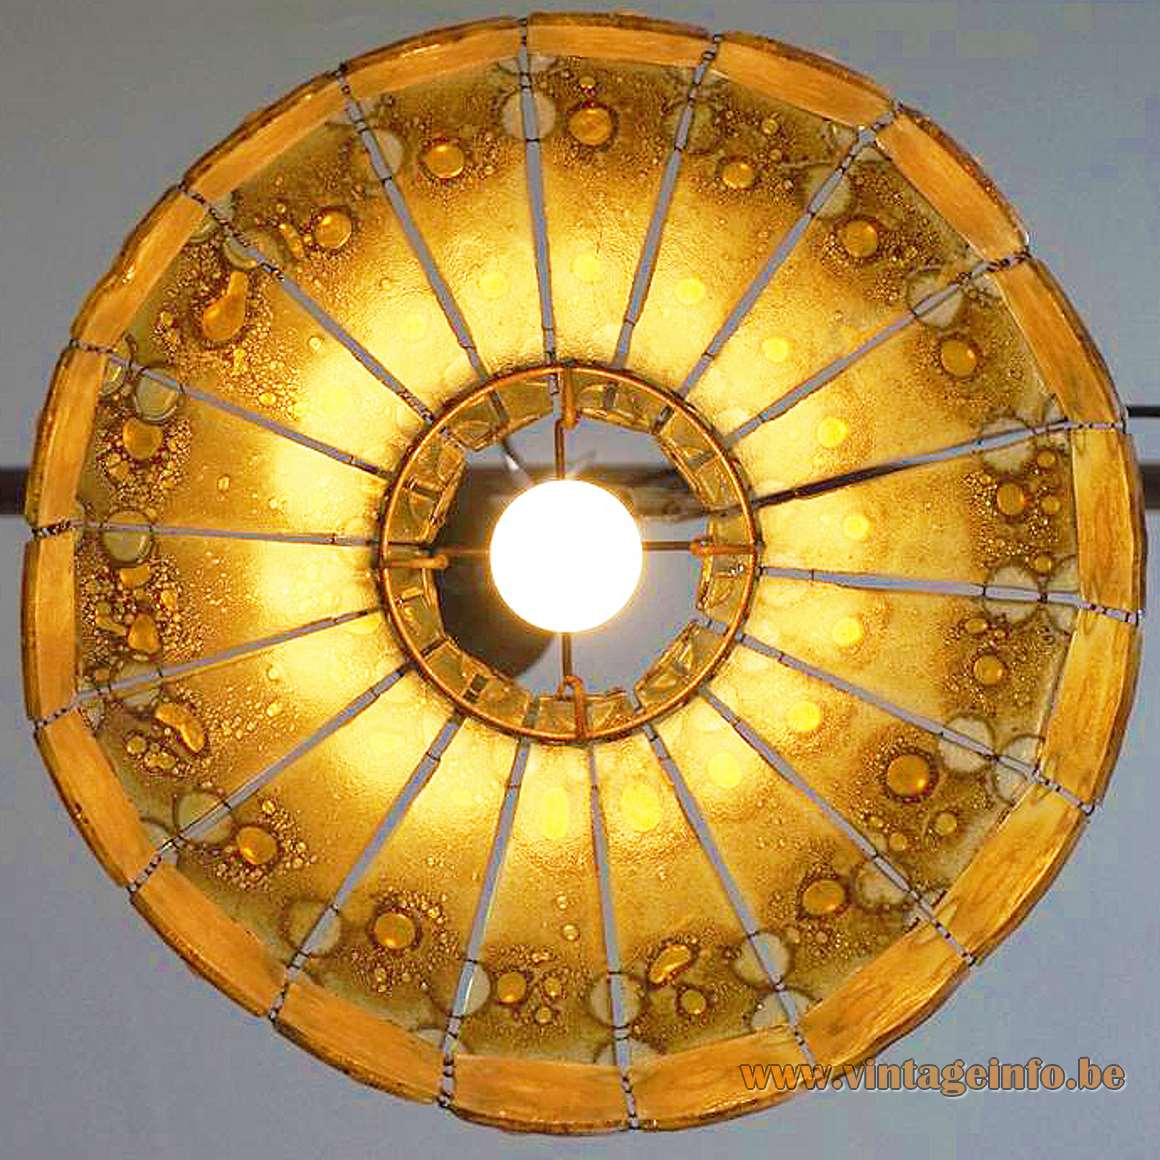 Filipe Derflinger Feder's glass chandelier conical amber mottled glass fused with metal Mexico 1960s 1970s chain